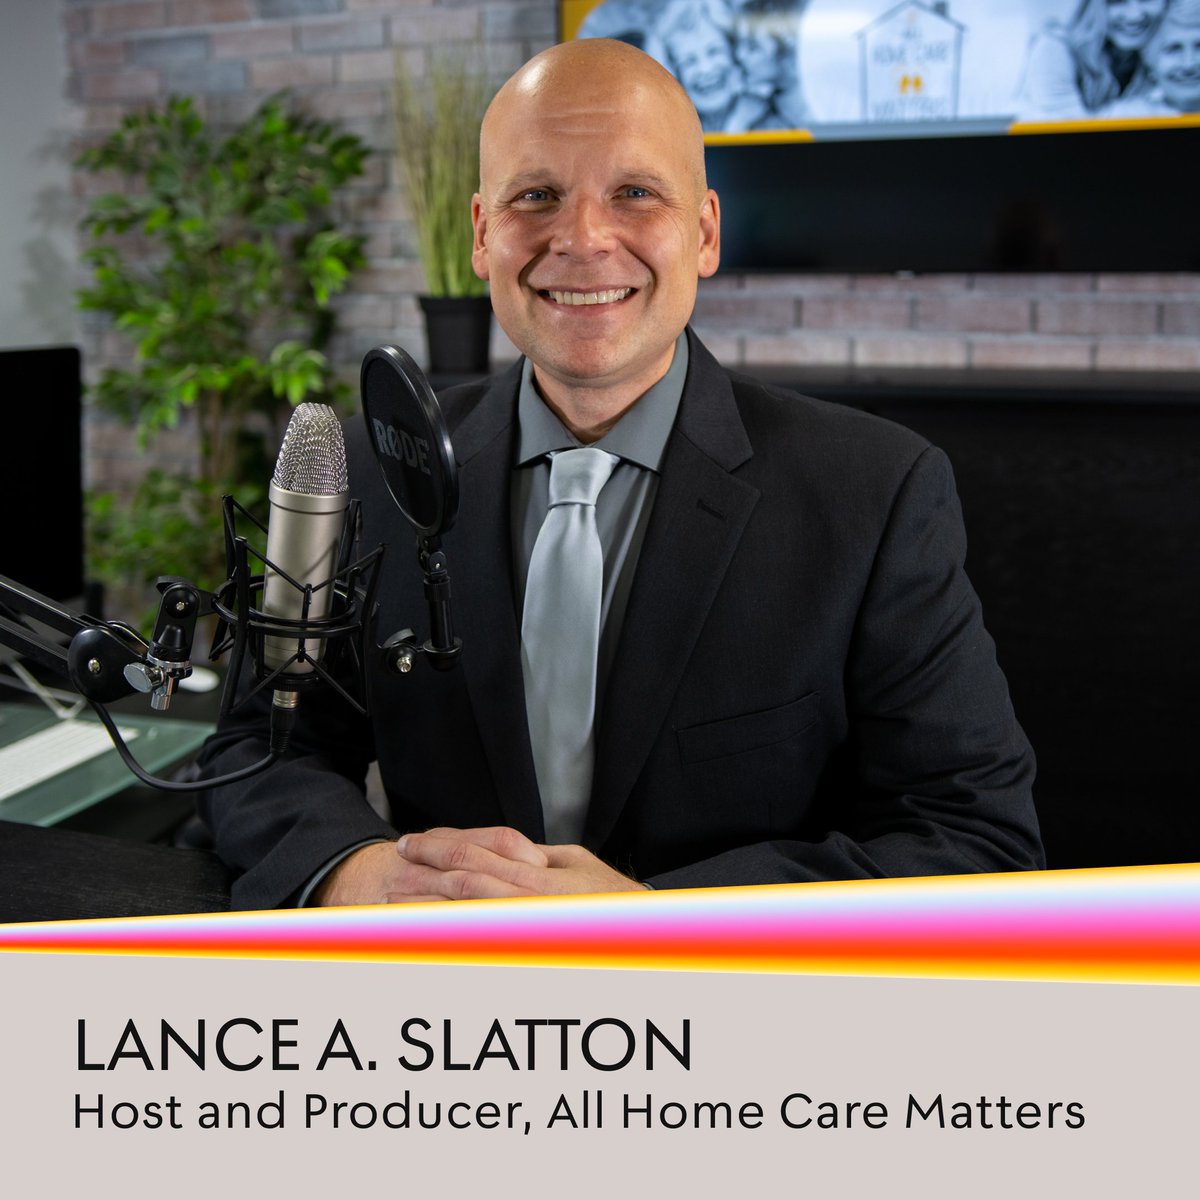 Meet AIVA Juror Lance A. Slatton! He's the Host and Producer of the All Home Care Matters (@allhcms) podcast, and a Certified Senior Case Manager at Enriched Life Home Care Services. We're happy to have Lance on board! Read more about our jurors at w3award.com.